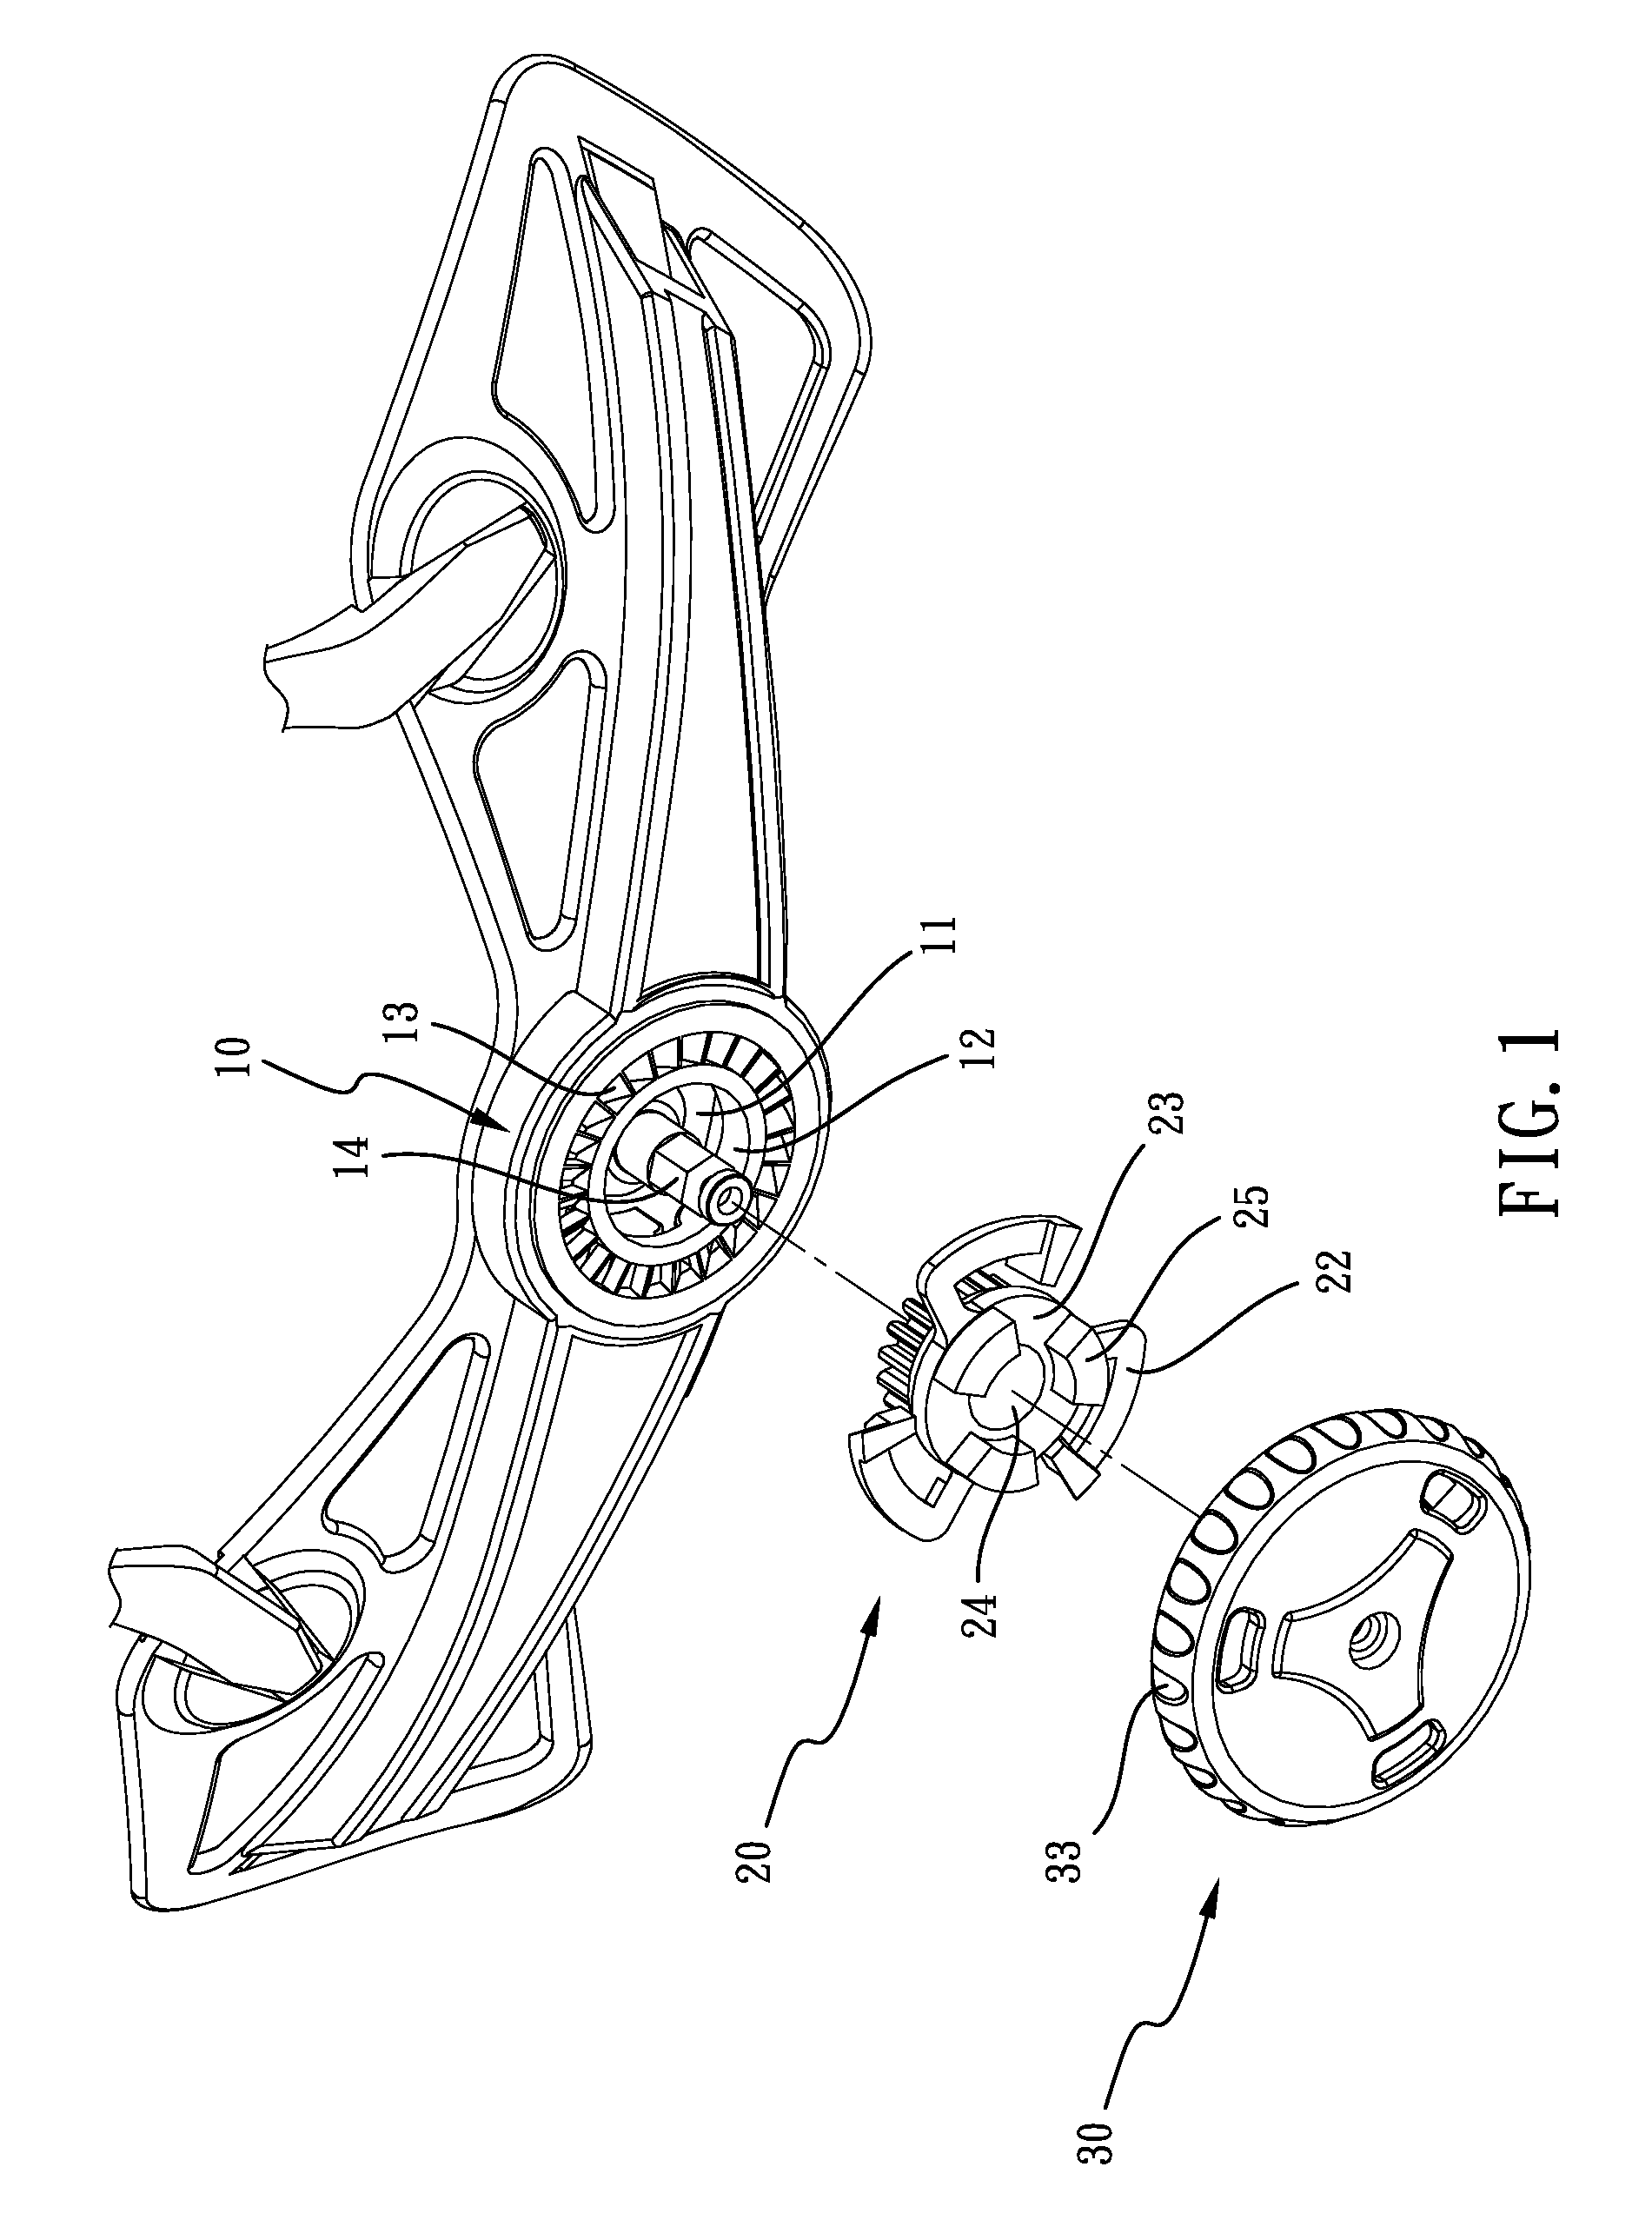 Adjusting device for tightening or loosing laces and straps